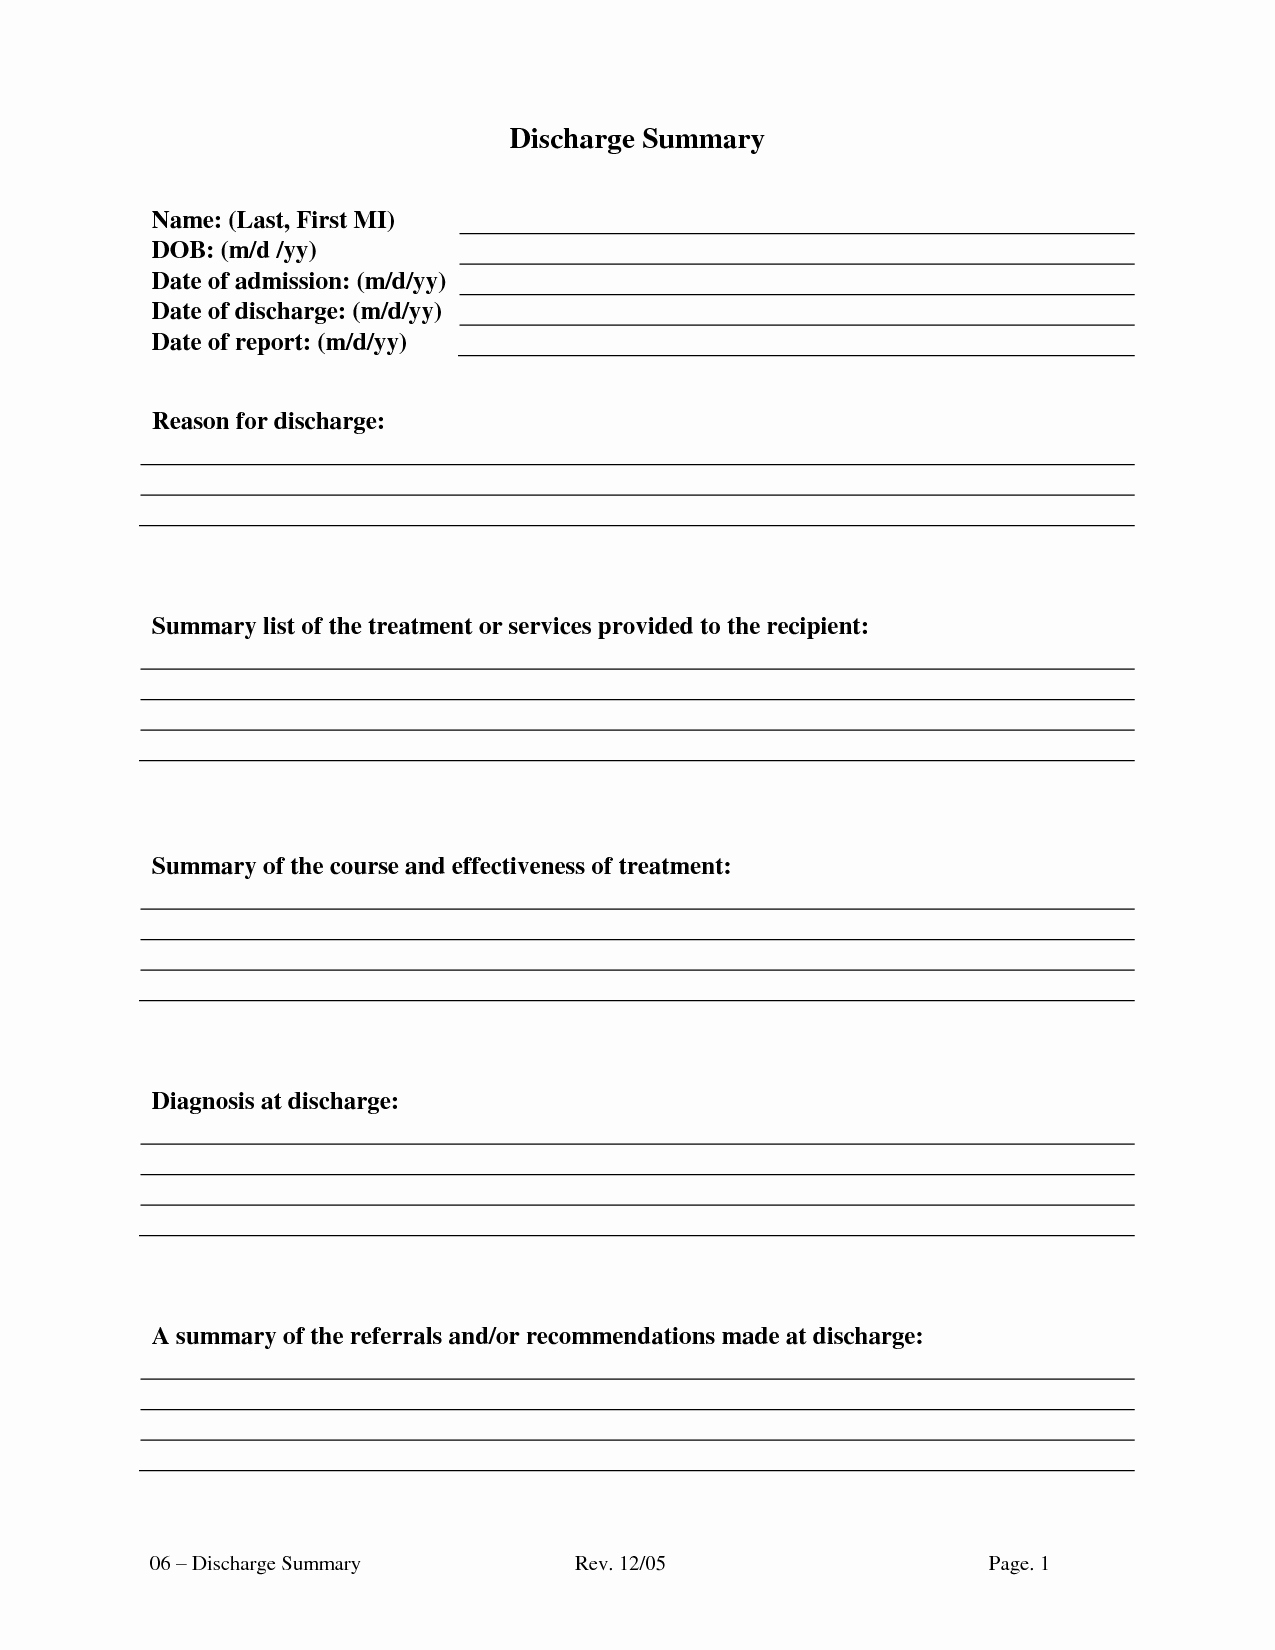 Hospital Discharge Summary Template Best Of Discharge Summary Template